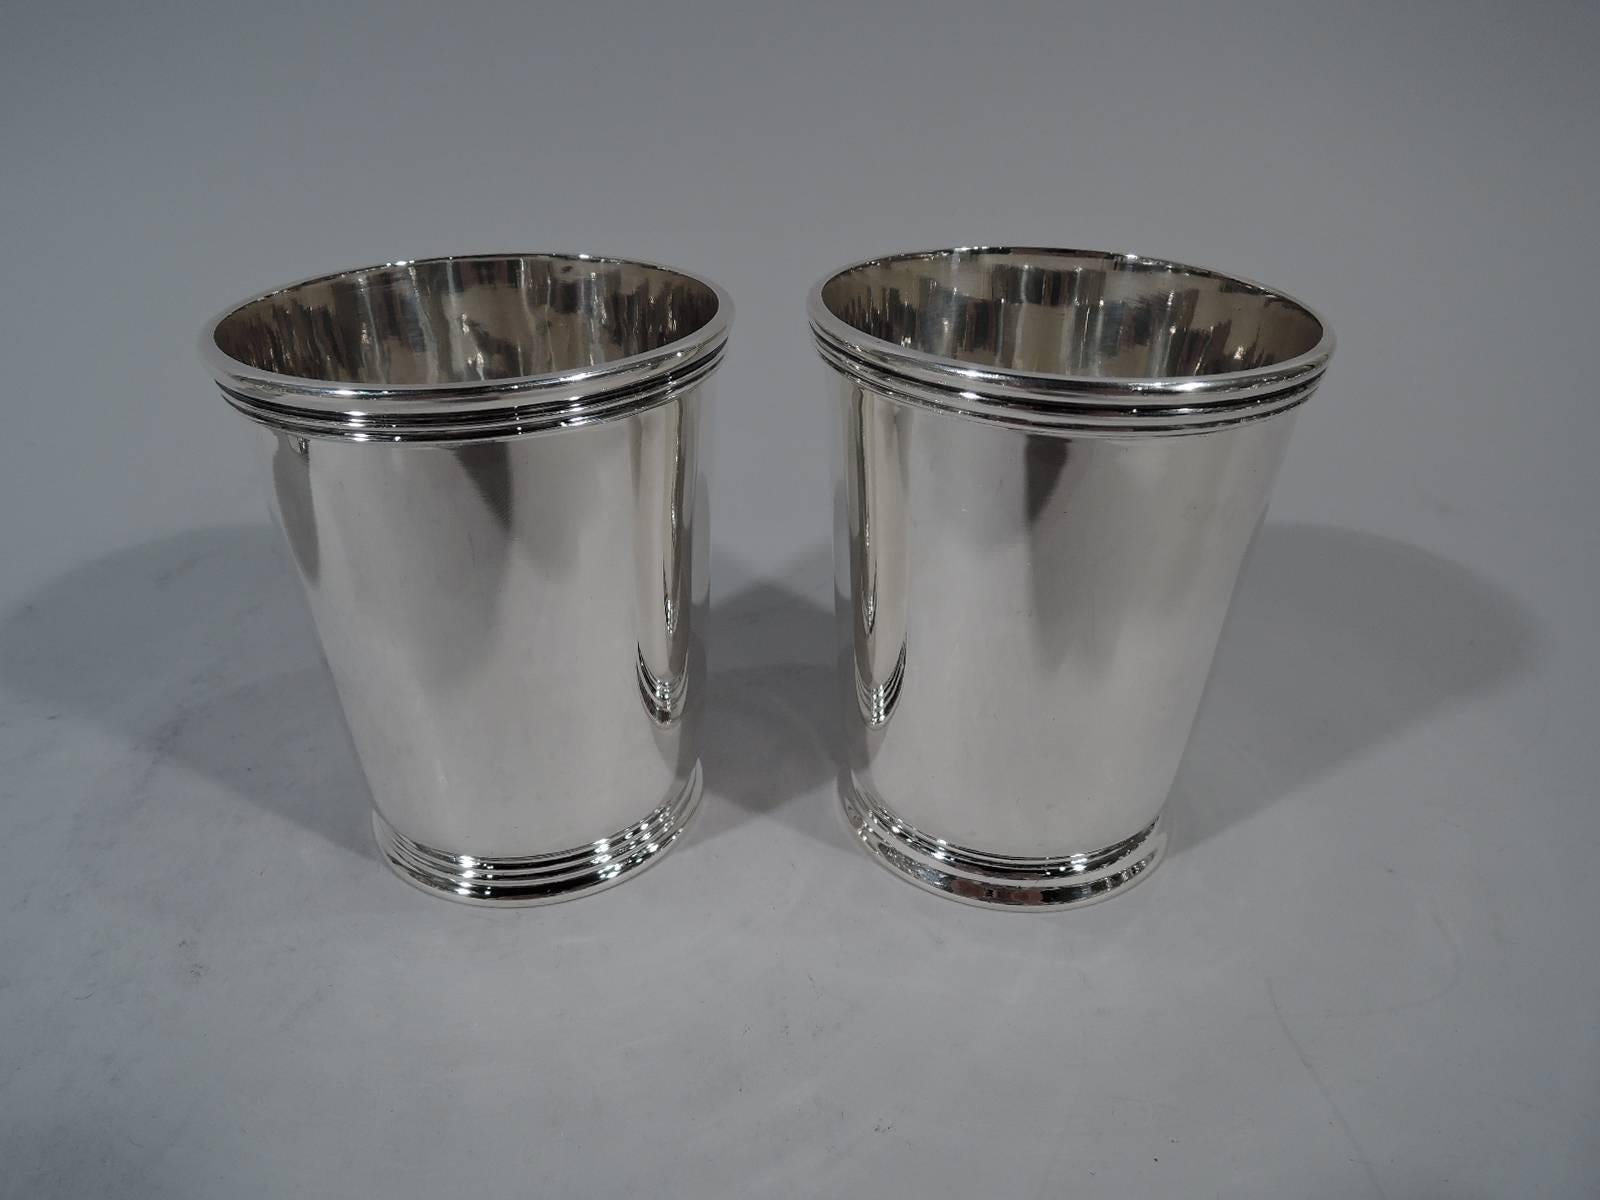 Set of four sterling silver mint julep cups. Made by R. Wallace & Sons Mfg. Co. in Wallingford, Conn. Each: Tapering sides with reeded rim and skirted foot. Hallmark includes no. 450. Heavy total weight: 20.2 troy ounces.